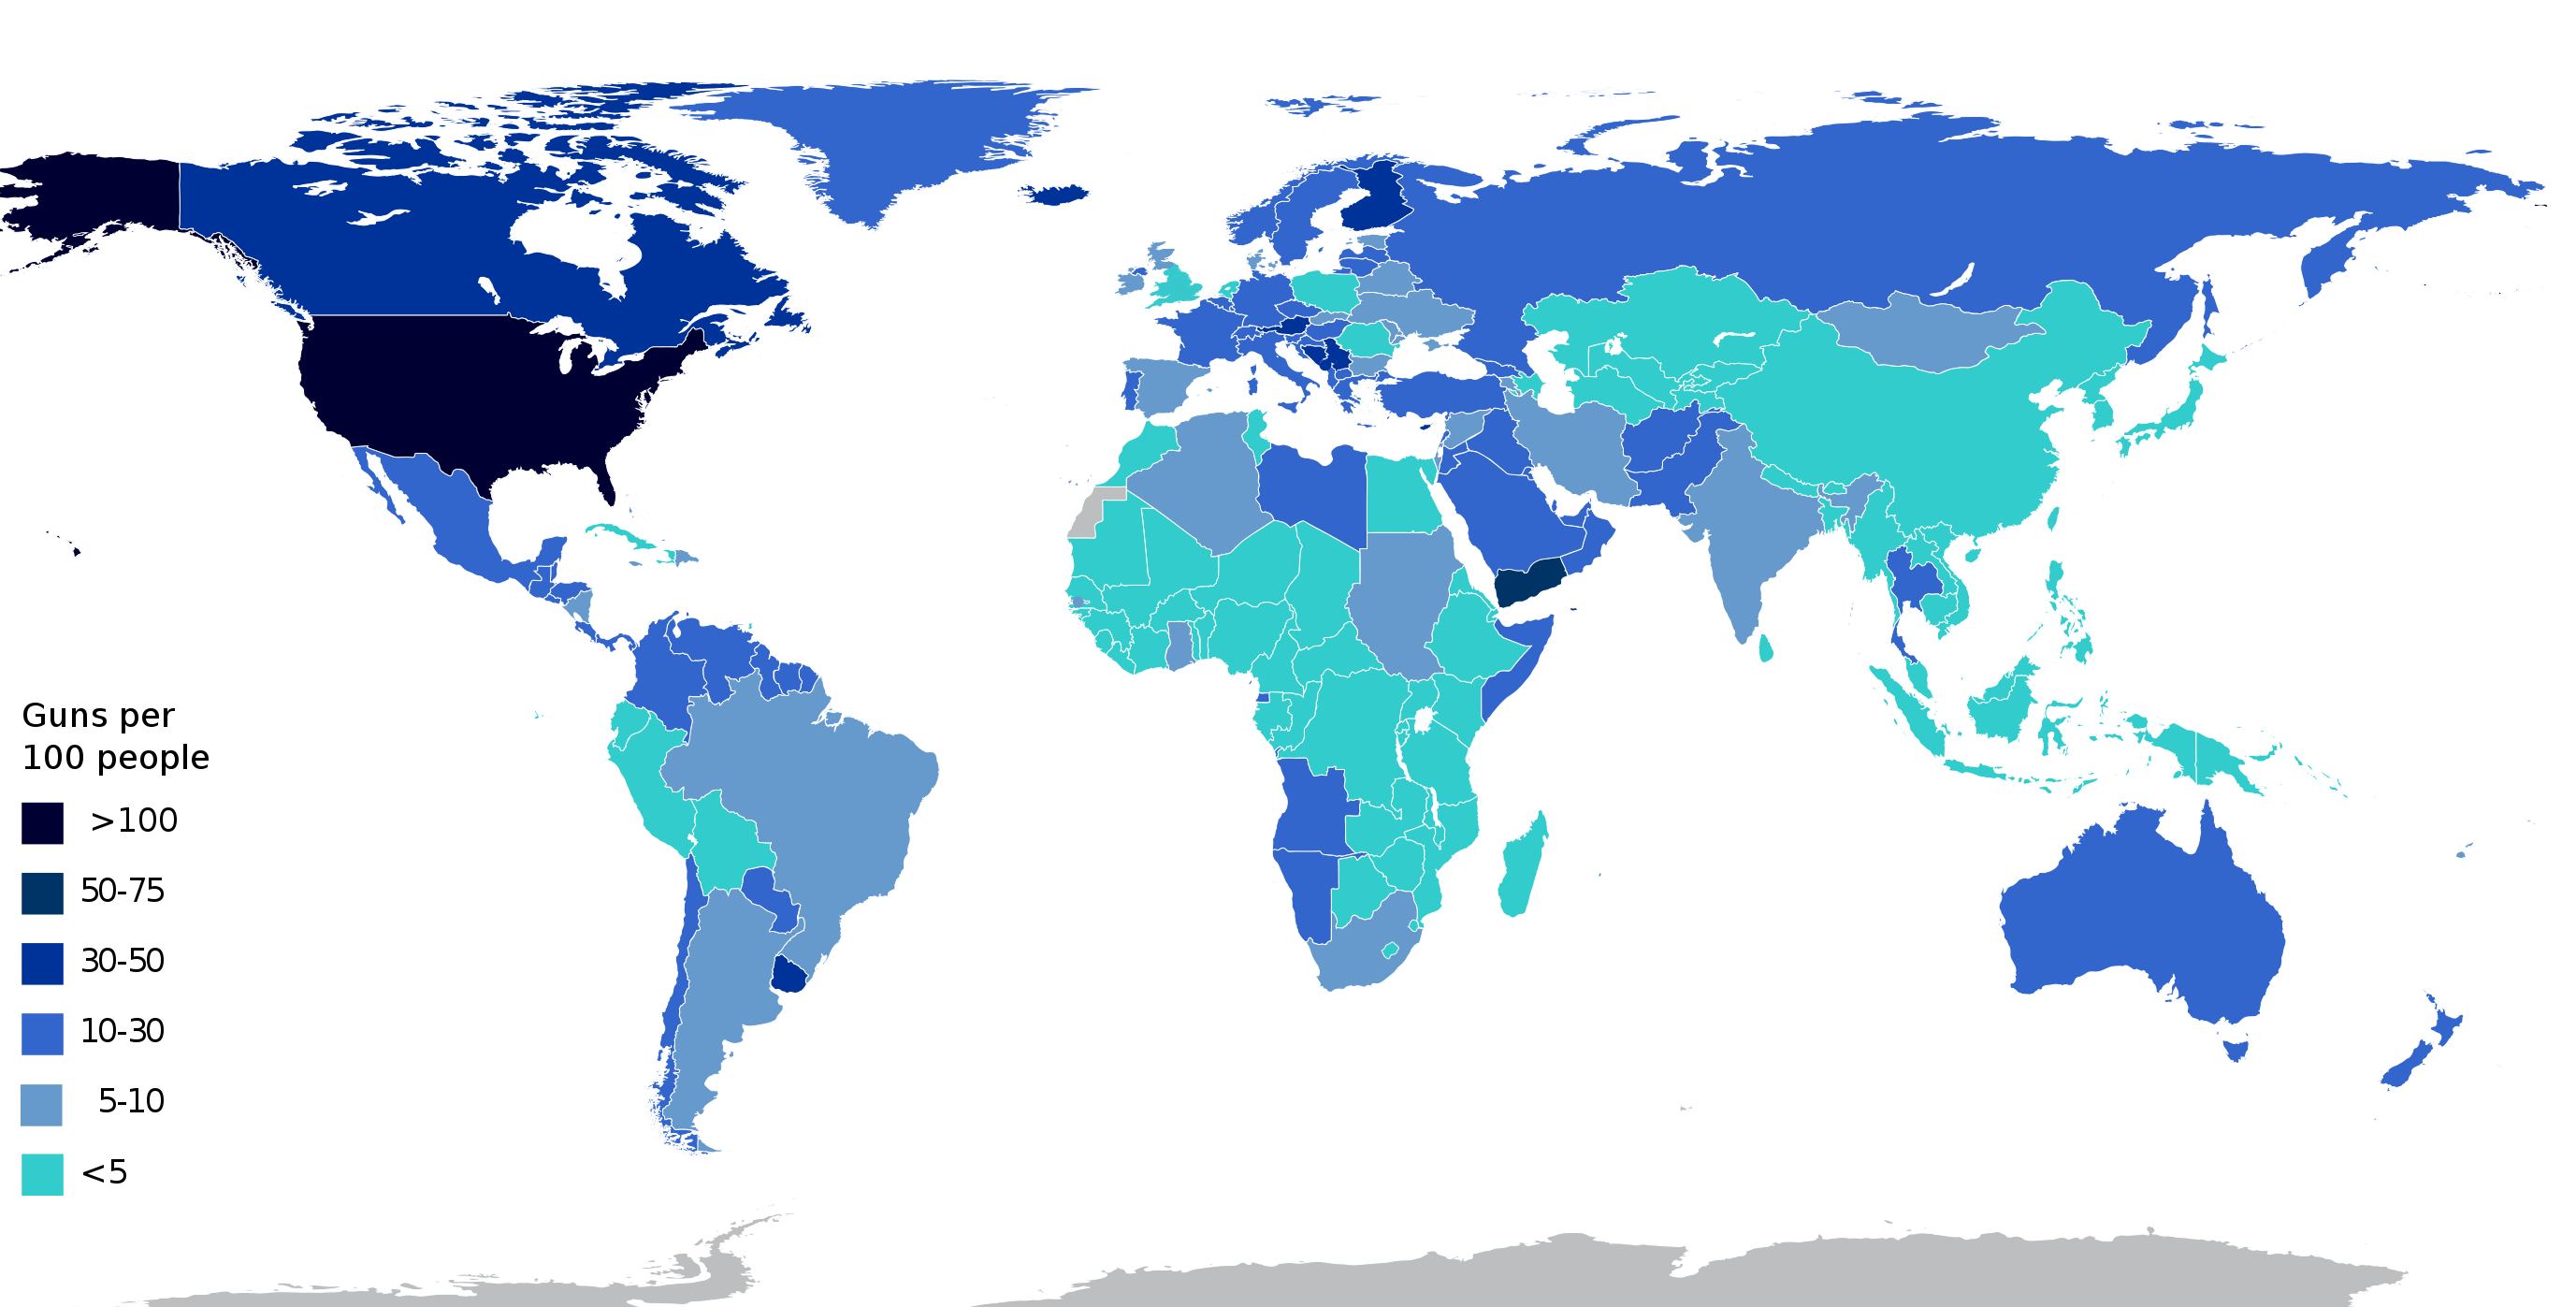 2754px-World_map_of_civilian_gun_ownership_-_2nd_color_scheme.svg.png